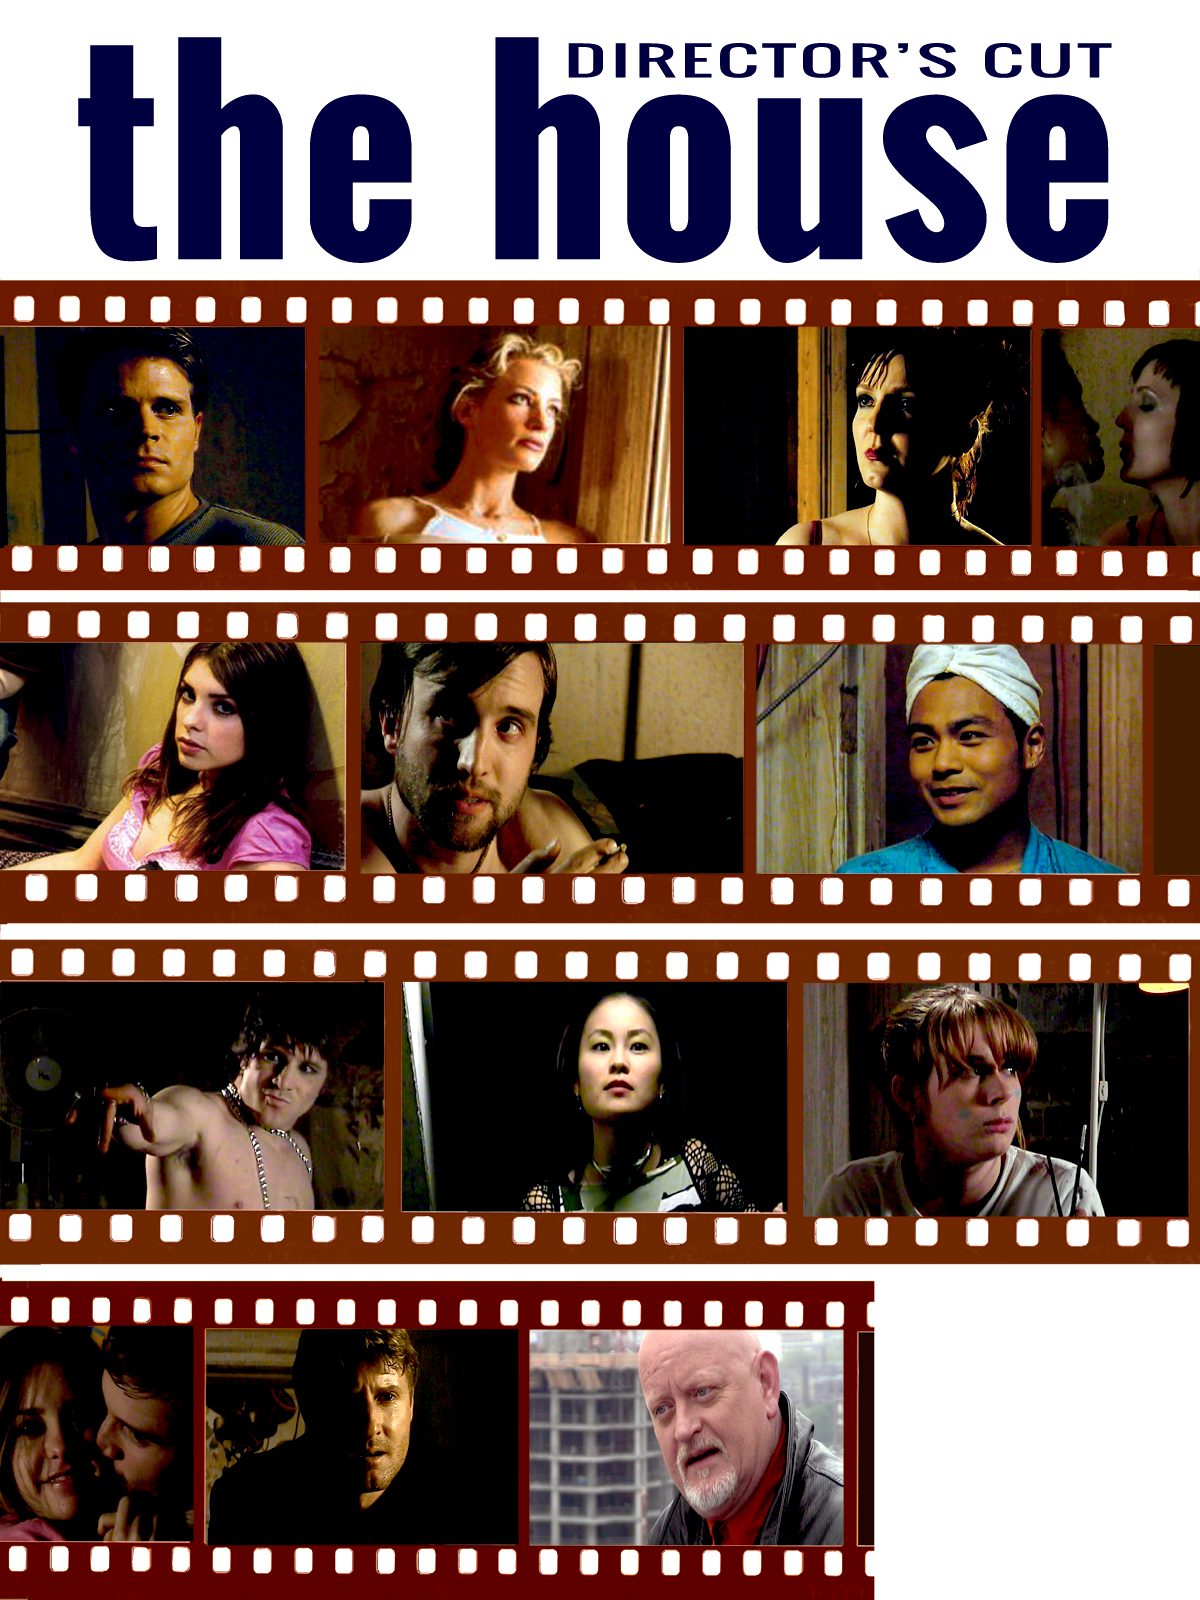 The House: Director's Cut